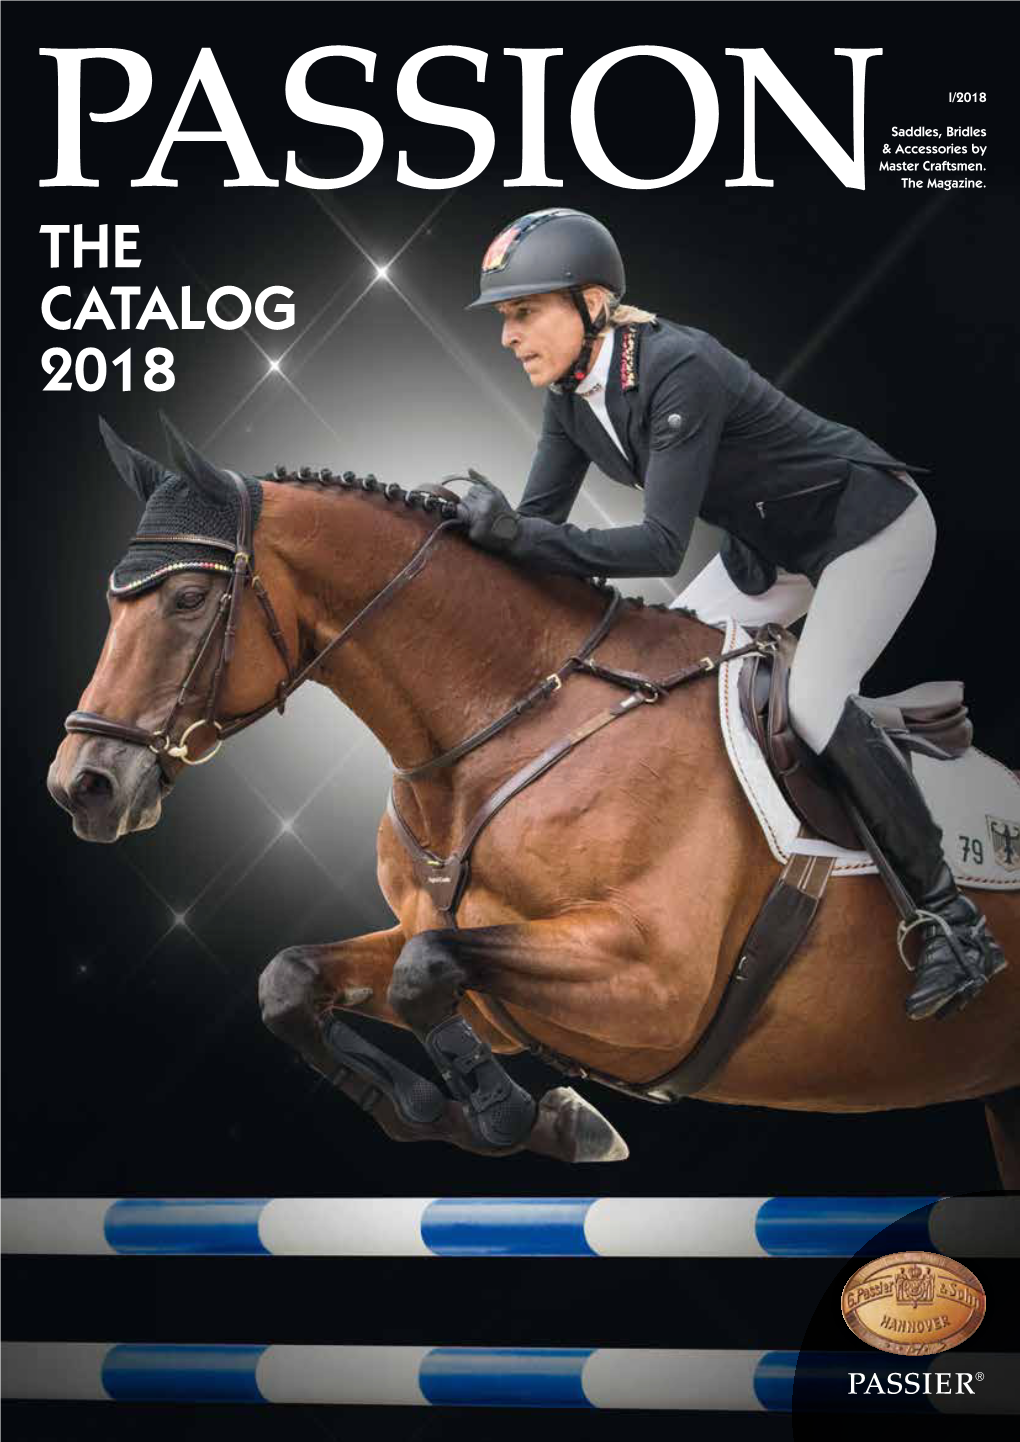 The Catalog 2018 I/2018 Dressage Saddles Saddles, Bridles Recommended by Top Riders! & Accessories by Master Craftsmen